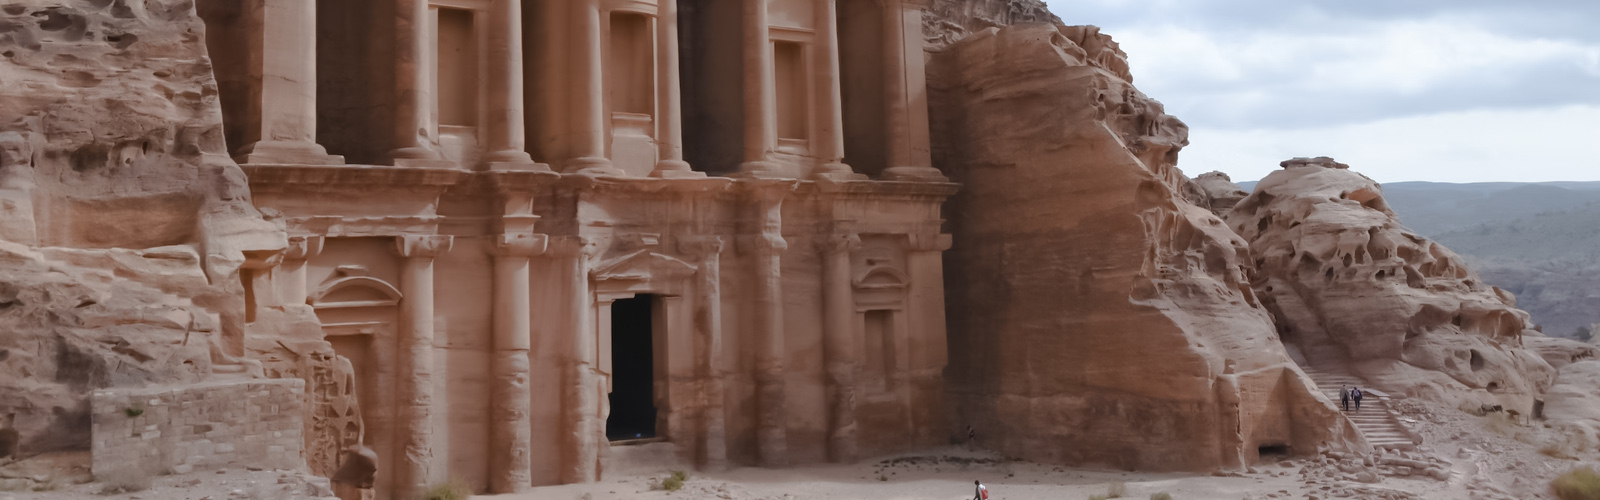 Petra Travel Guide Petra Travel Guide (2023): History, Facts, Things to Do, How to Reach, Best Time to Visit